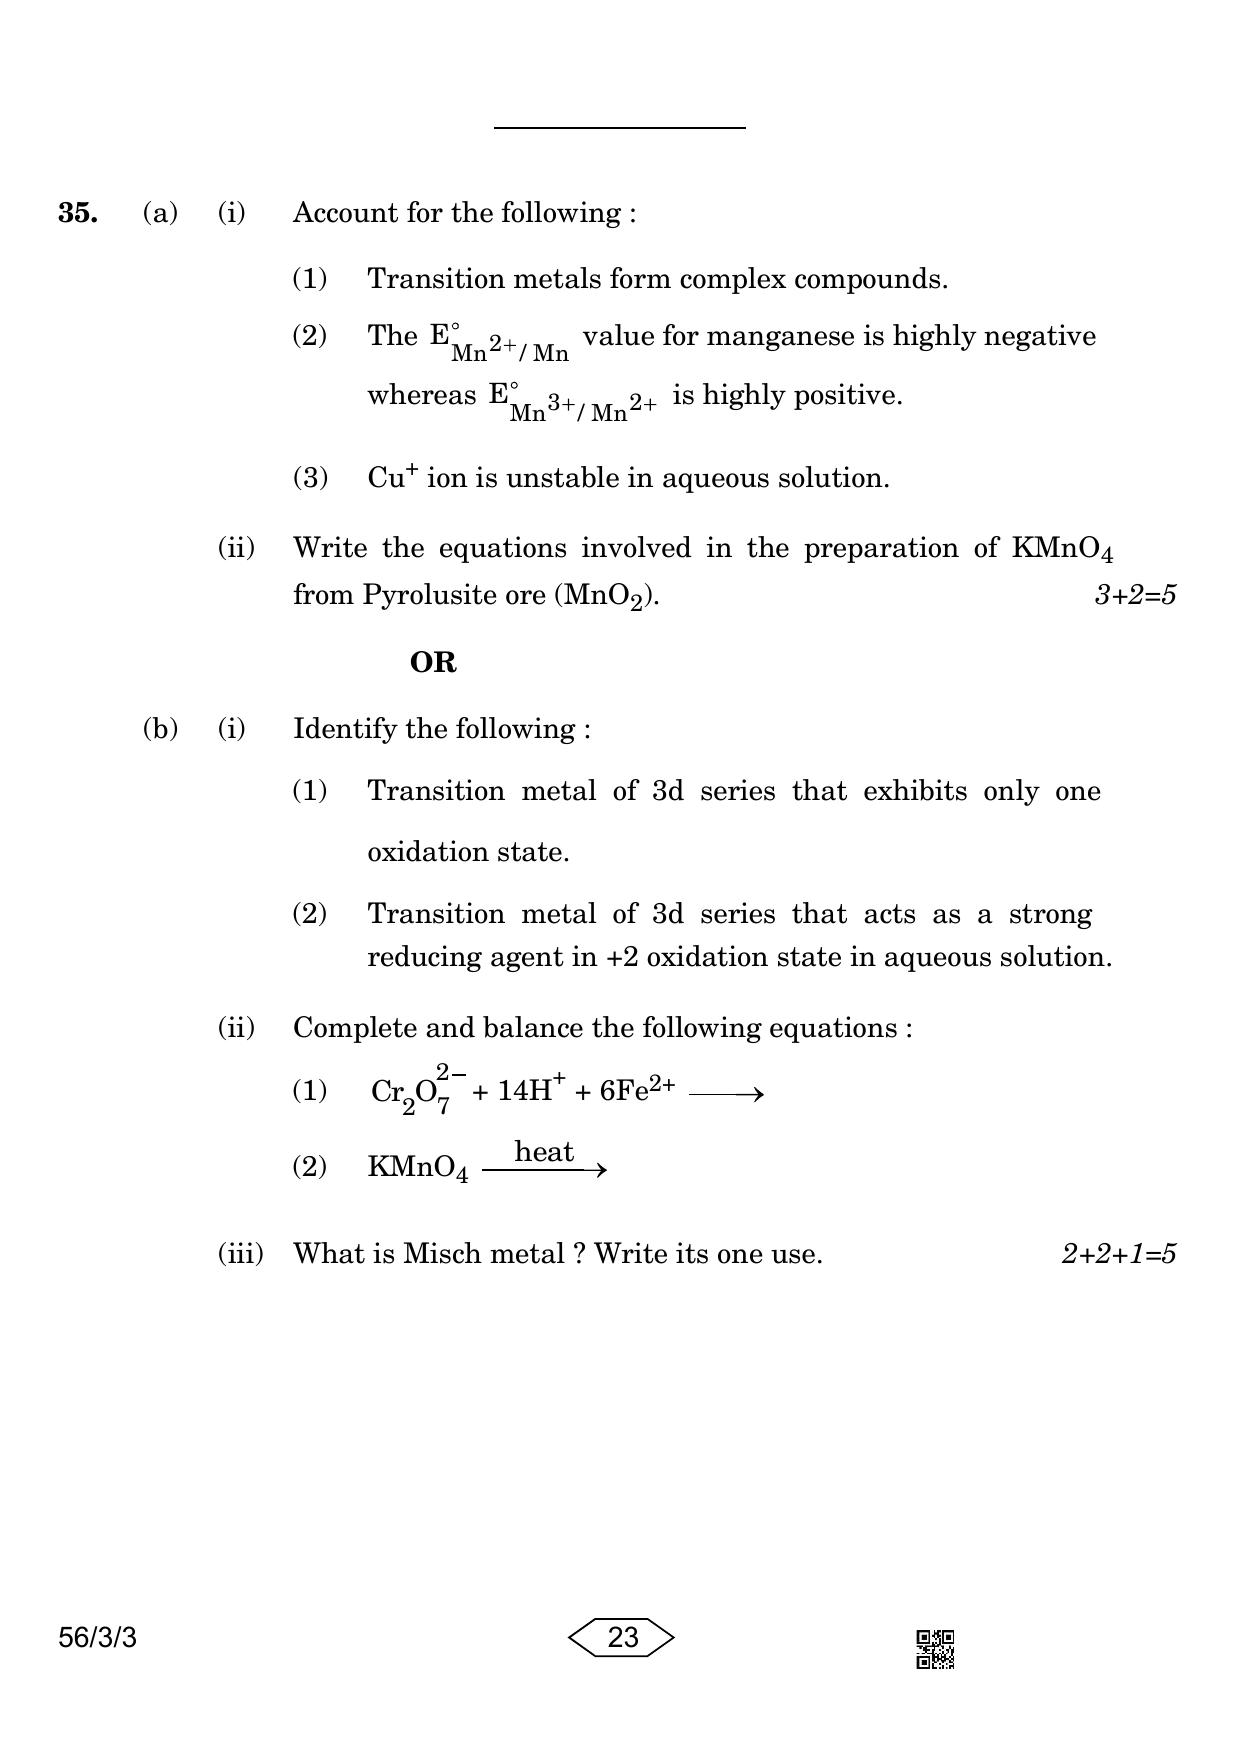 CBSE Class 12 56-3-3 Chemistry 2023 Question Paper - Page 23